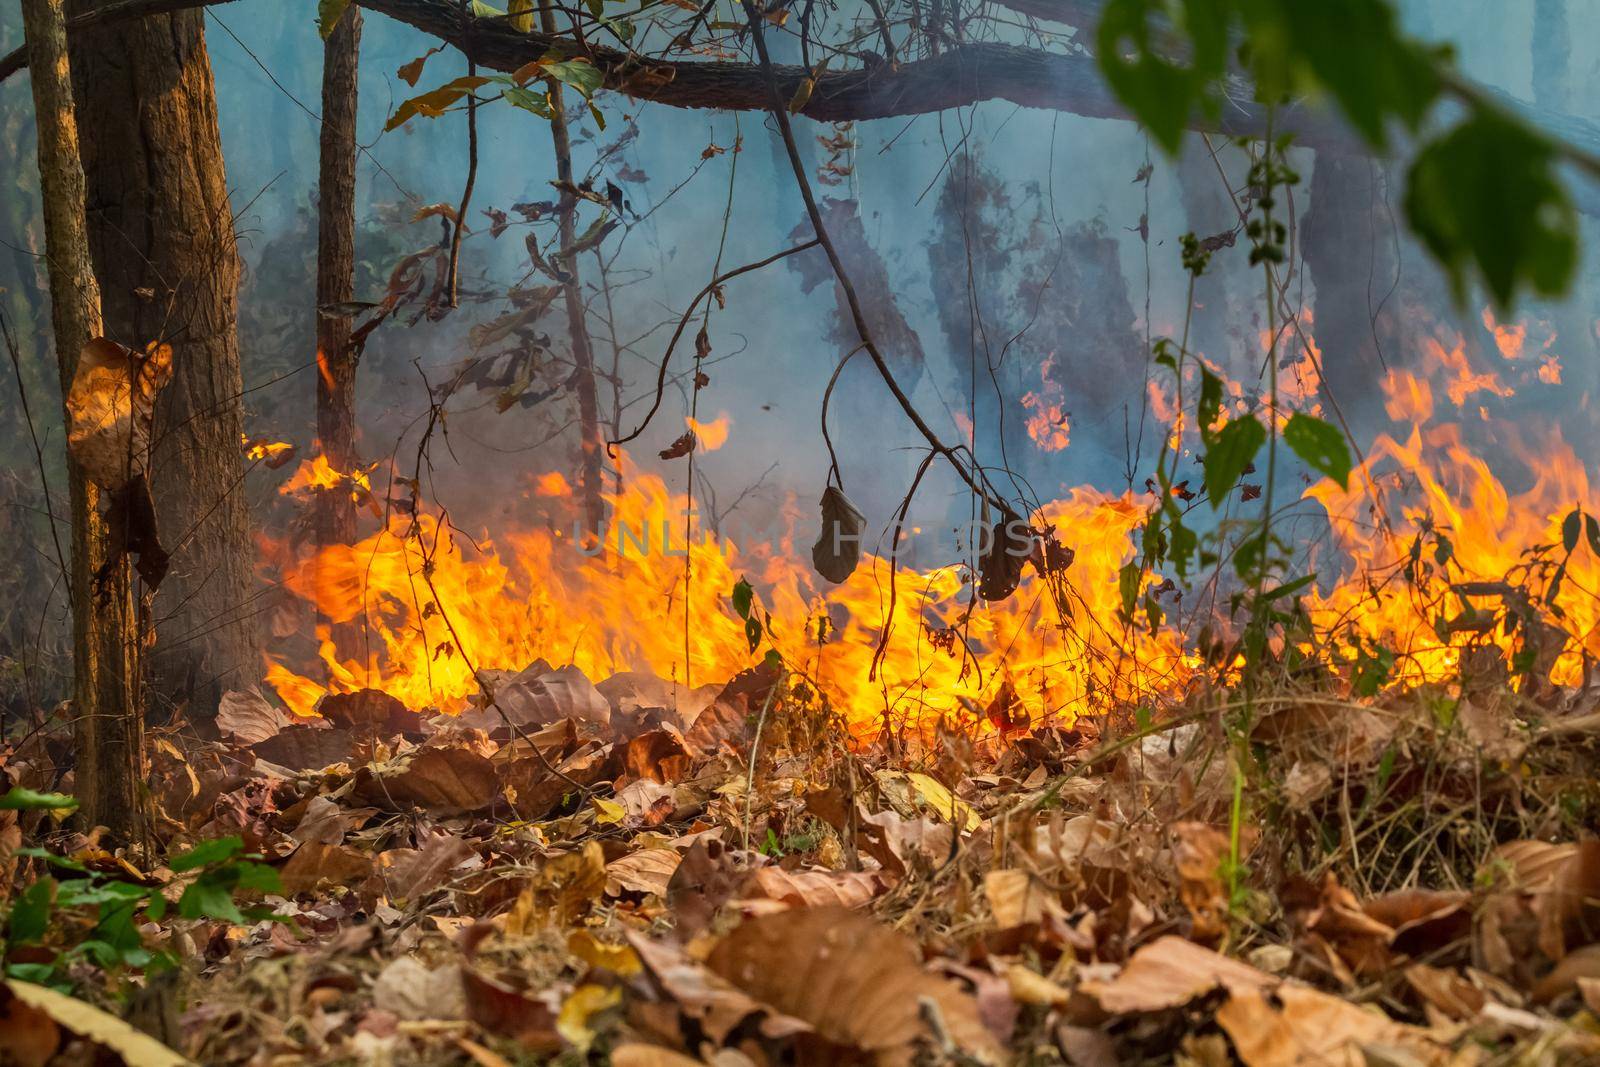 Rain forest fire disaster is burning caused by humans by toa55